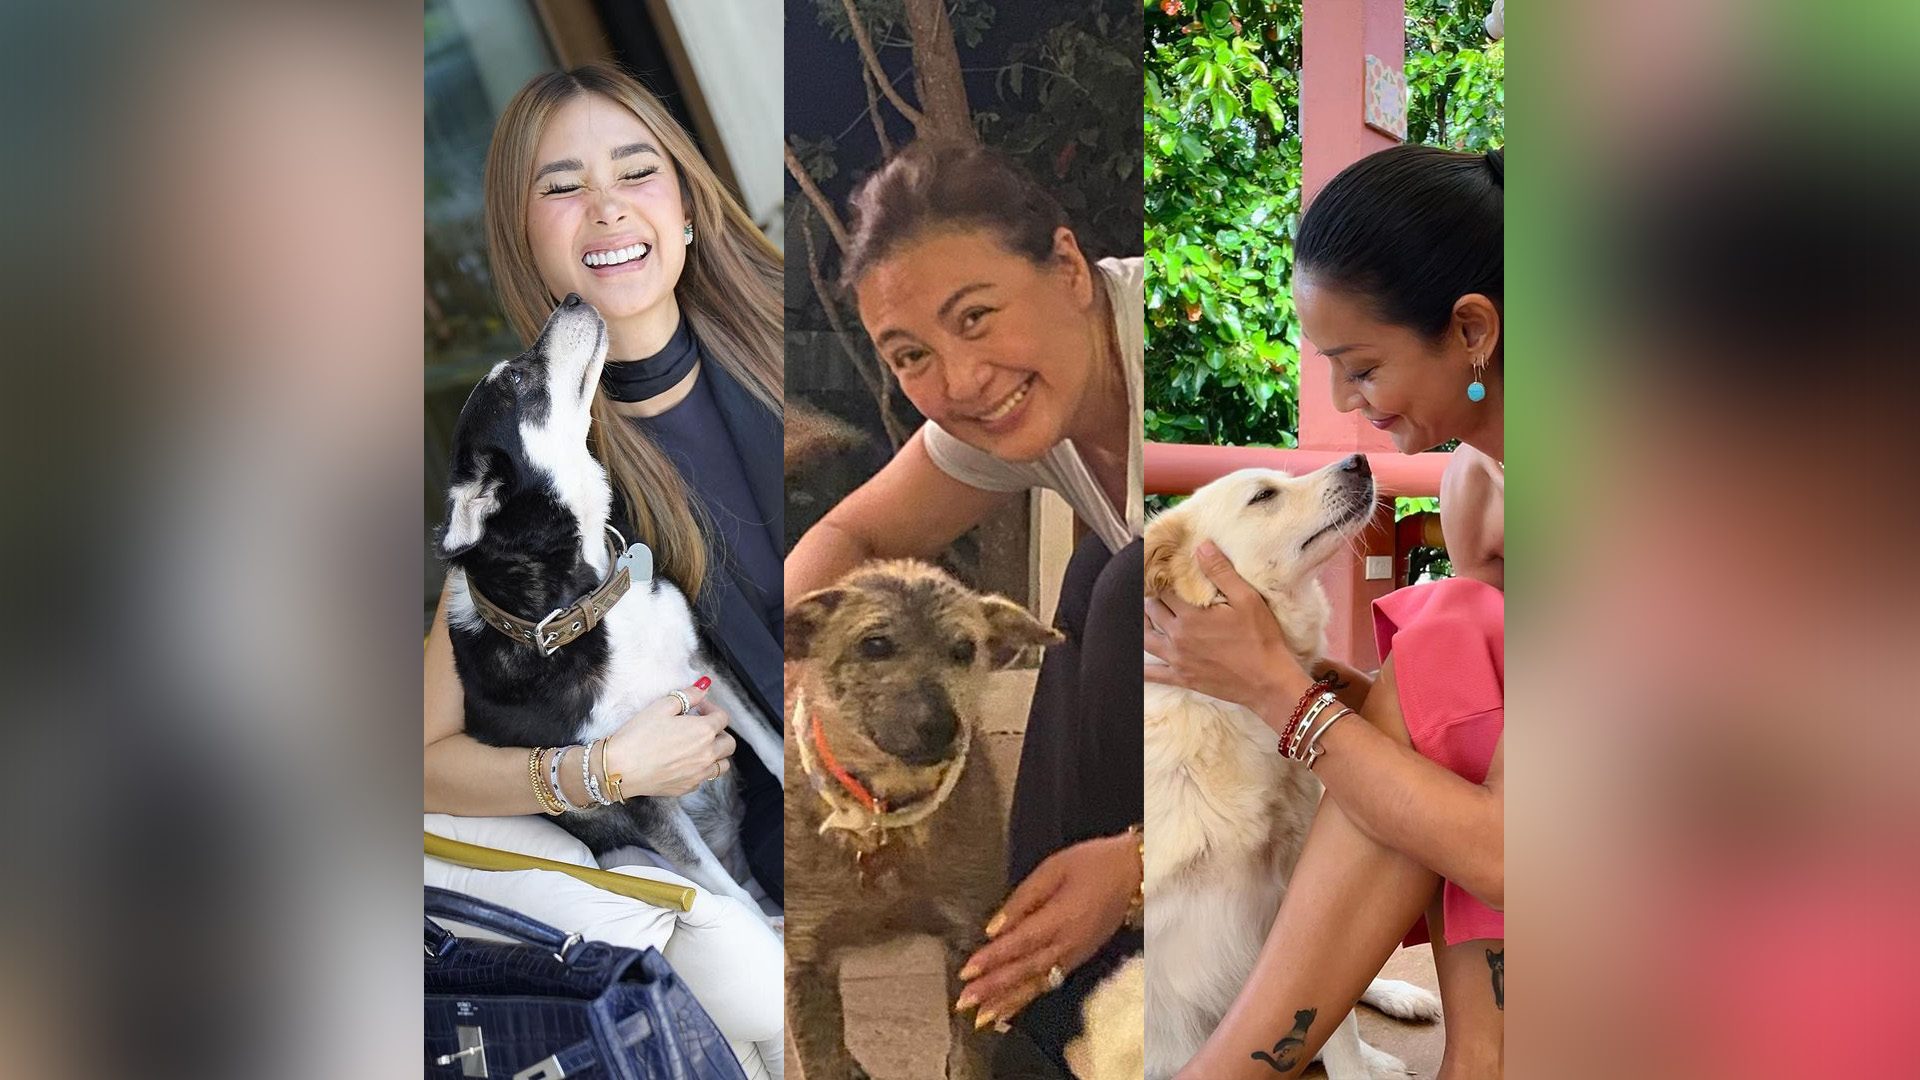 Adopt don't shop: Filipino celebrities with rescue dogs